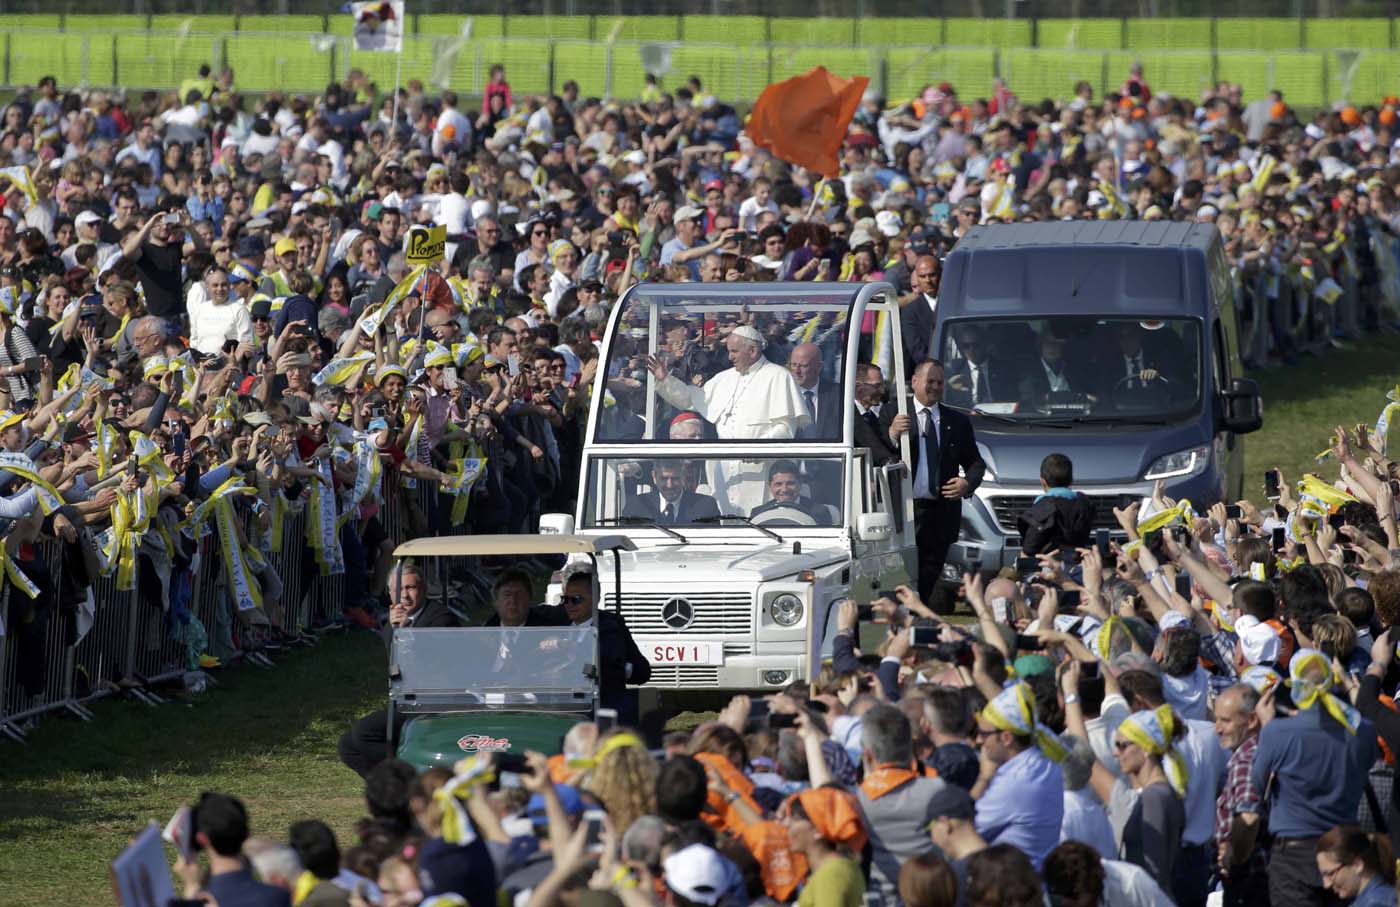 Pope Francis waves to the faithful from the popemobile as he arrives to celebrate Mass at Monza Park in Milan, Italy, March 25, 2017.   REUTERS/Max Rossi